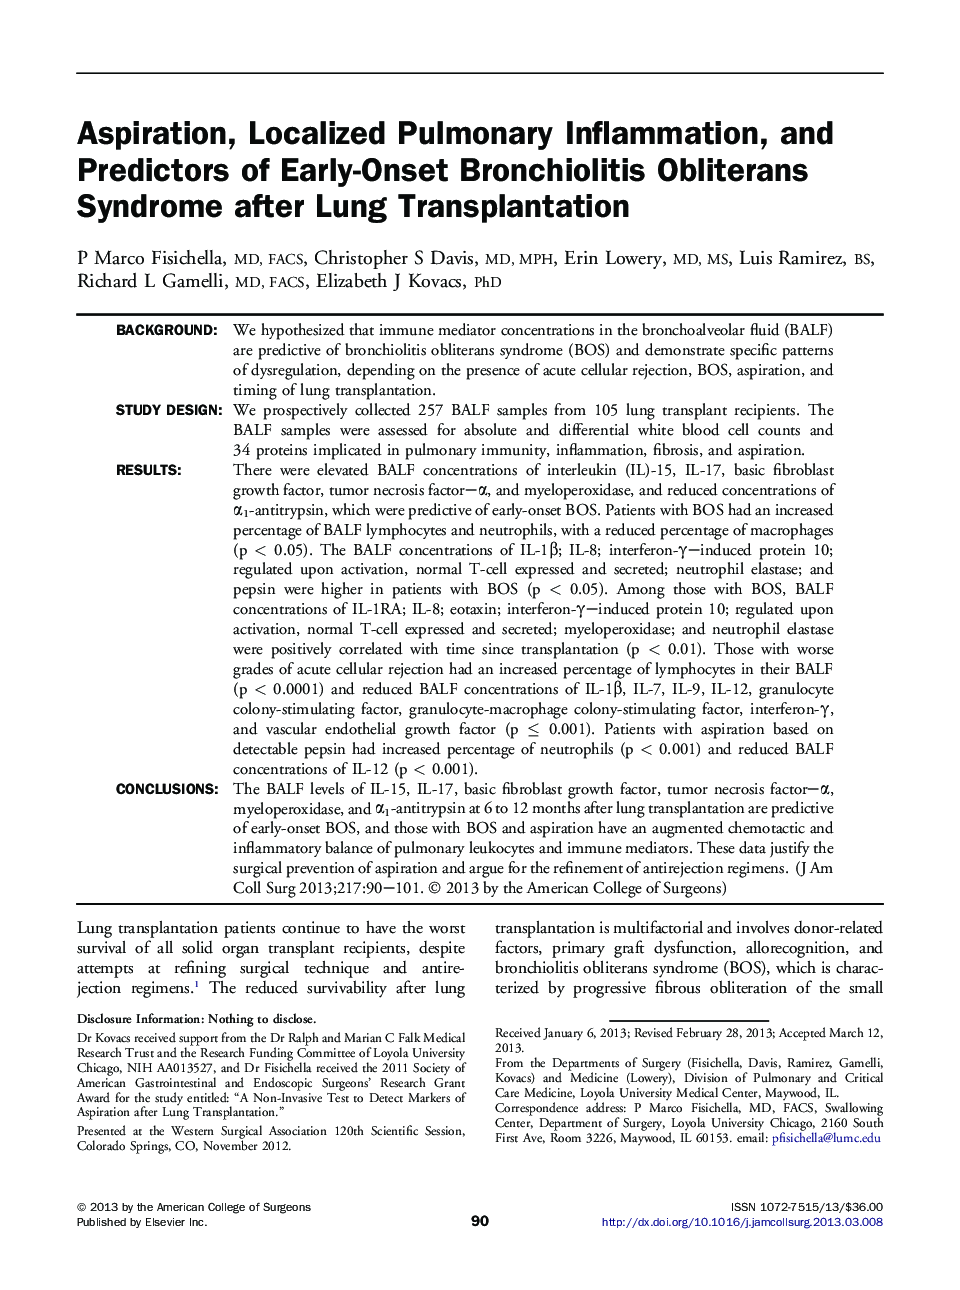 Aspiration, Localized Pulmonary Inflammation, and Predictors of Early-Onset Bronchiolitis Obliterans Syndrome after Lung Transplantation 